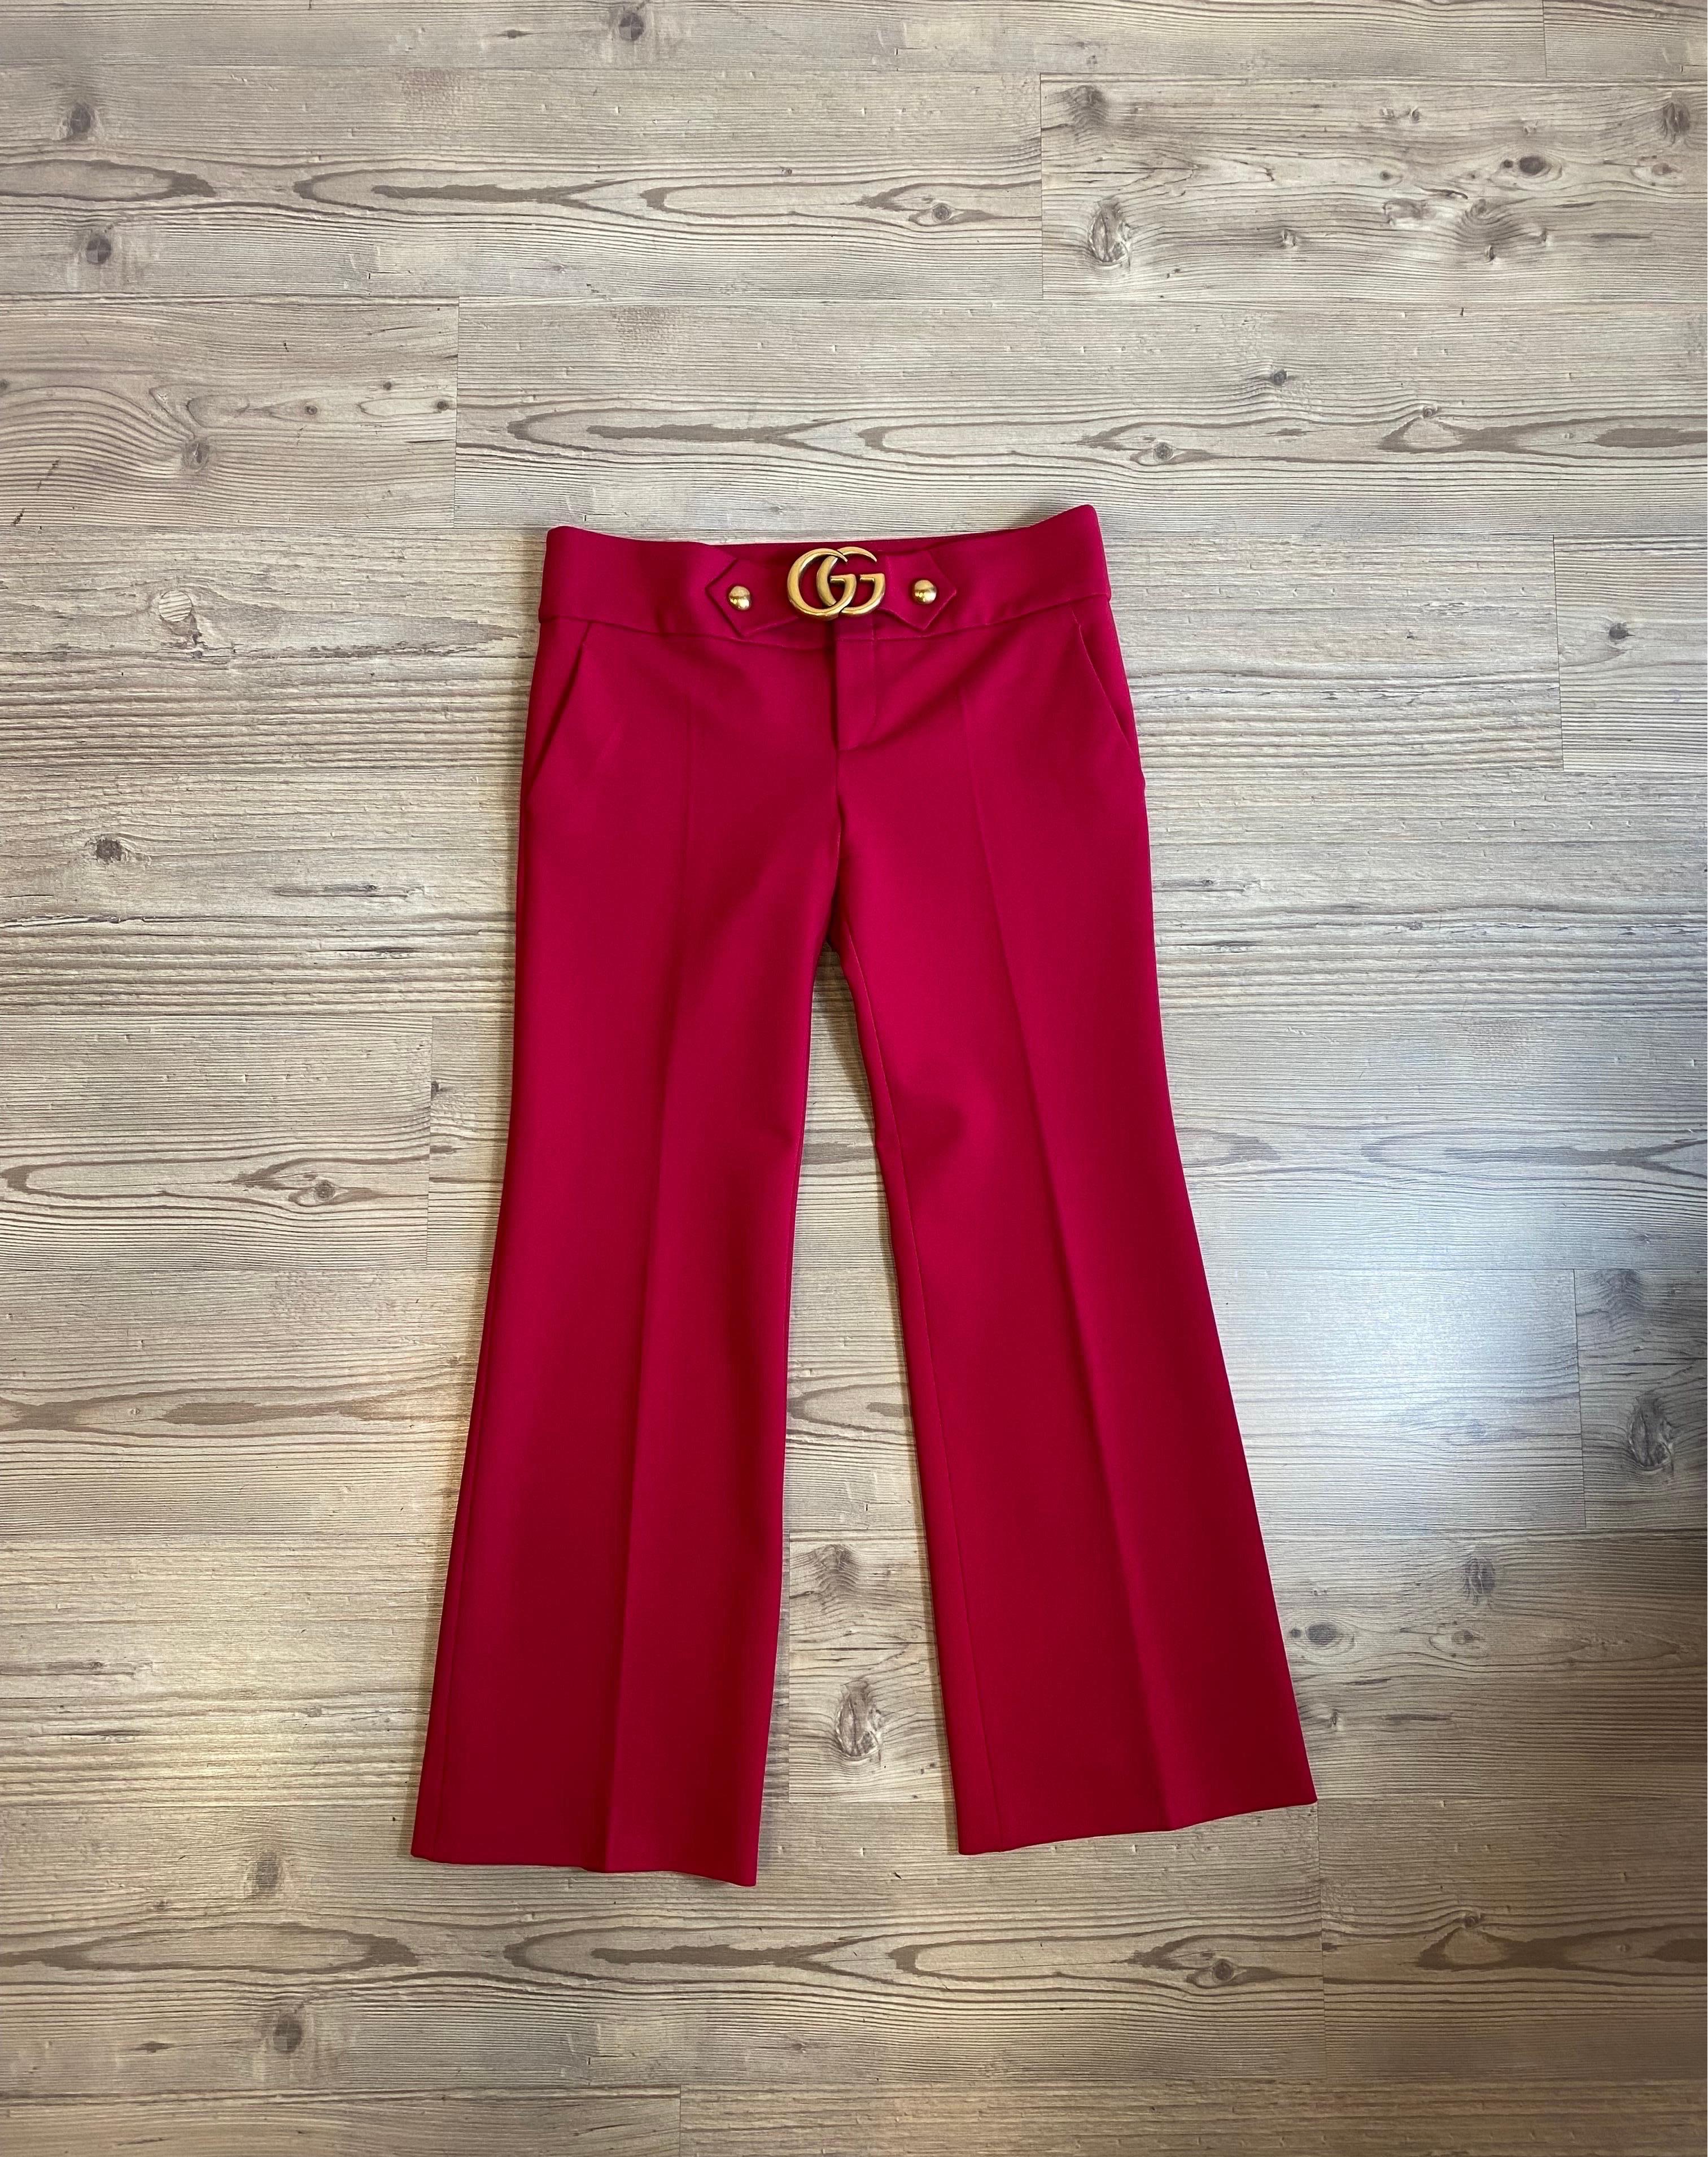 Gucci trousers.
2016 collection
In viscose, polyamide, elastane. Lined.
Gold GG hardware.
Italian size 46
Waist 46 cm
Length 98 cm
Excellent general condition, with signs of normal use.
A very light halo under the golden GGs as shown in the photo.